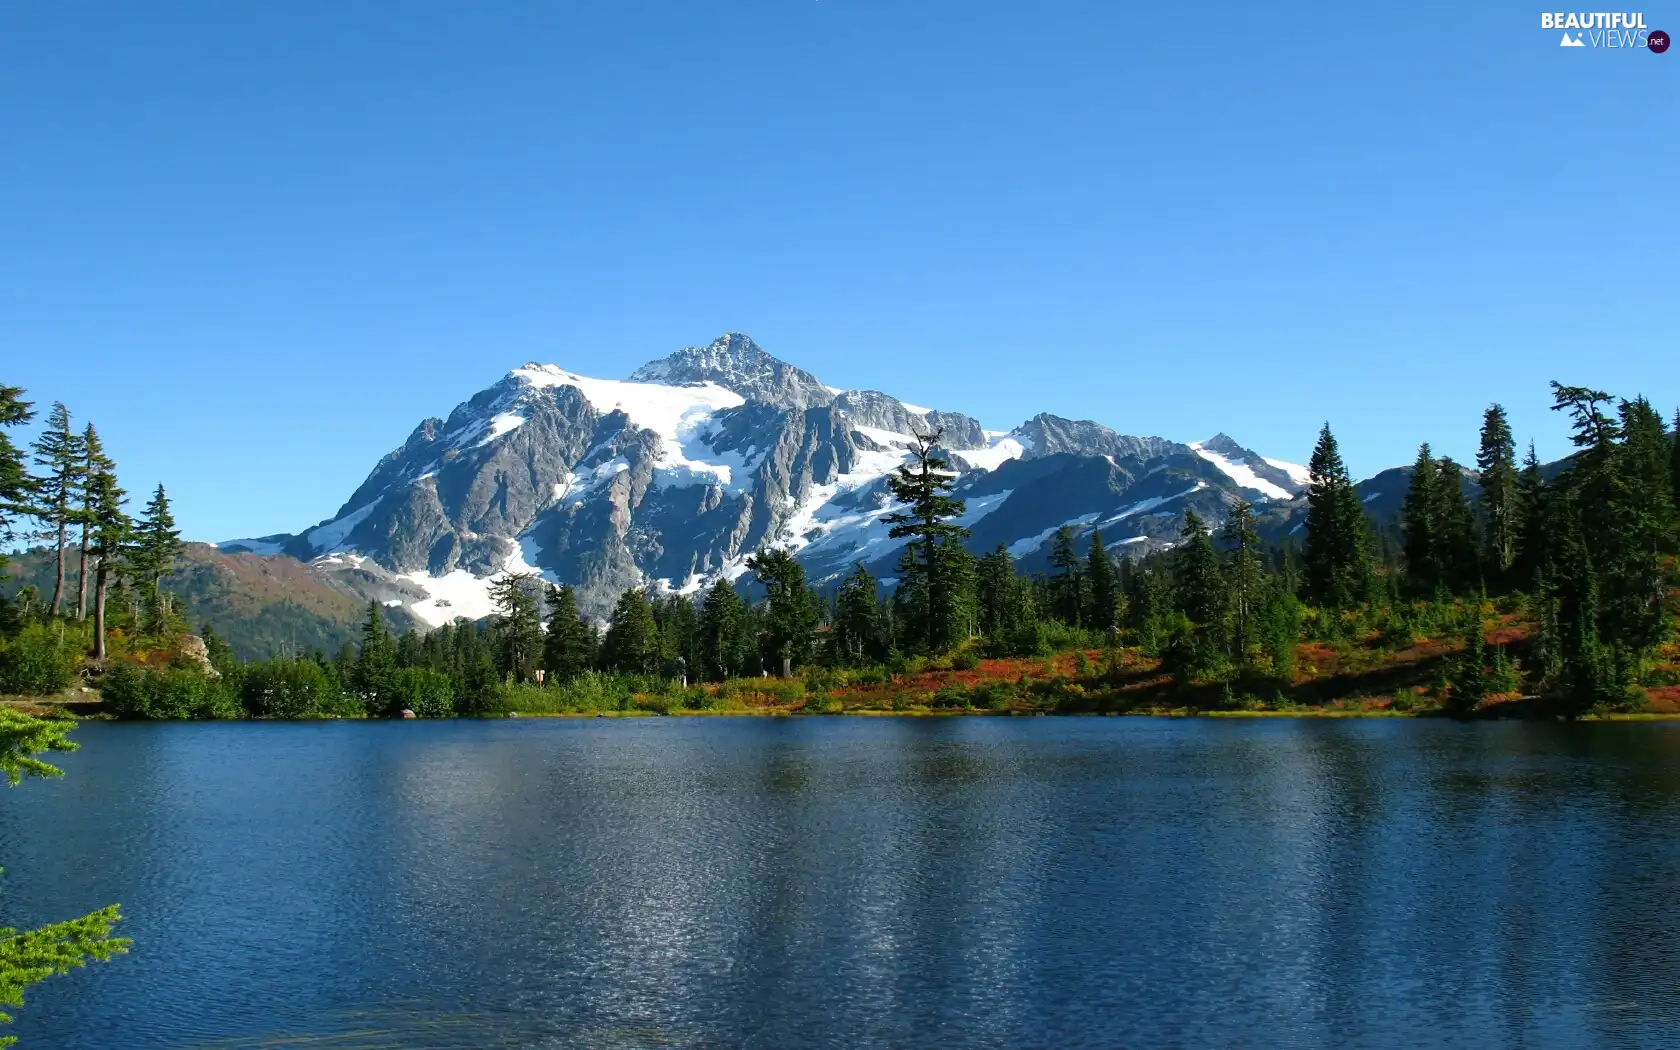 Mountains, viewes, water, trees